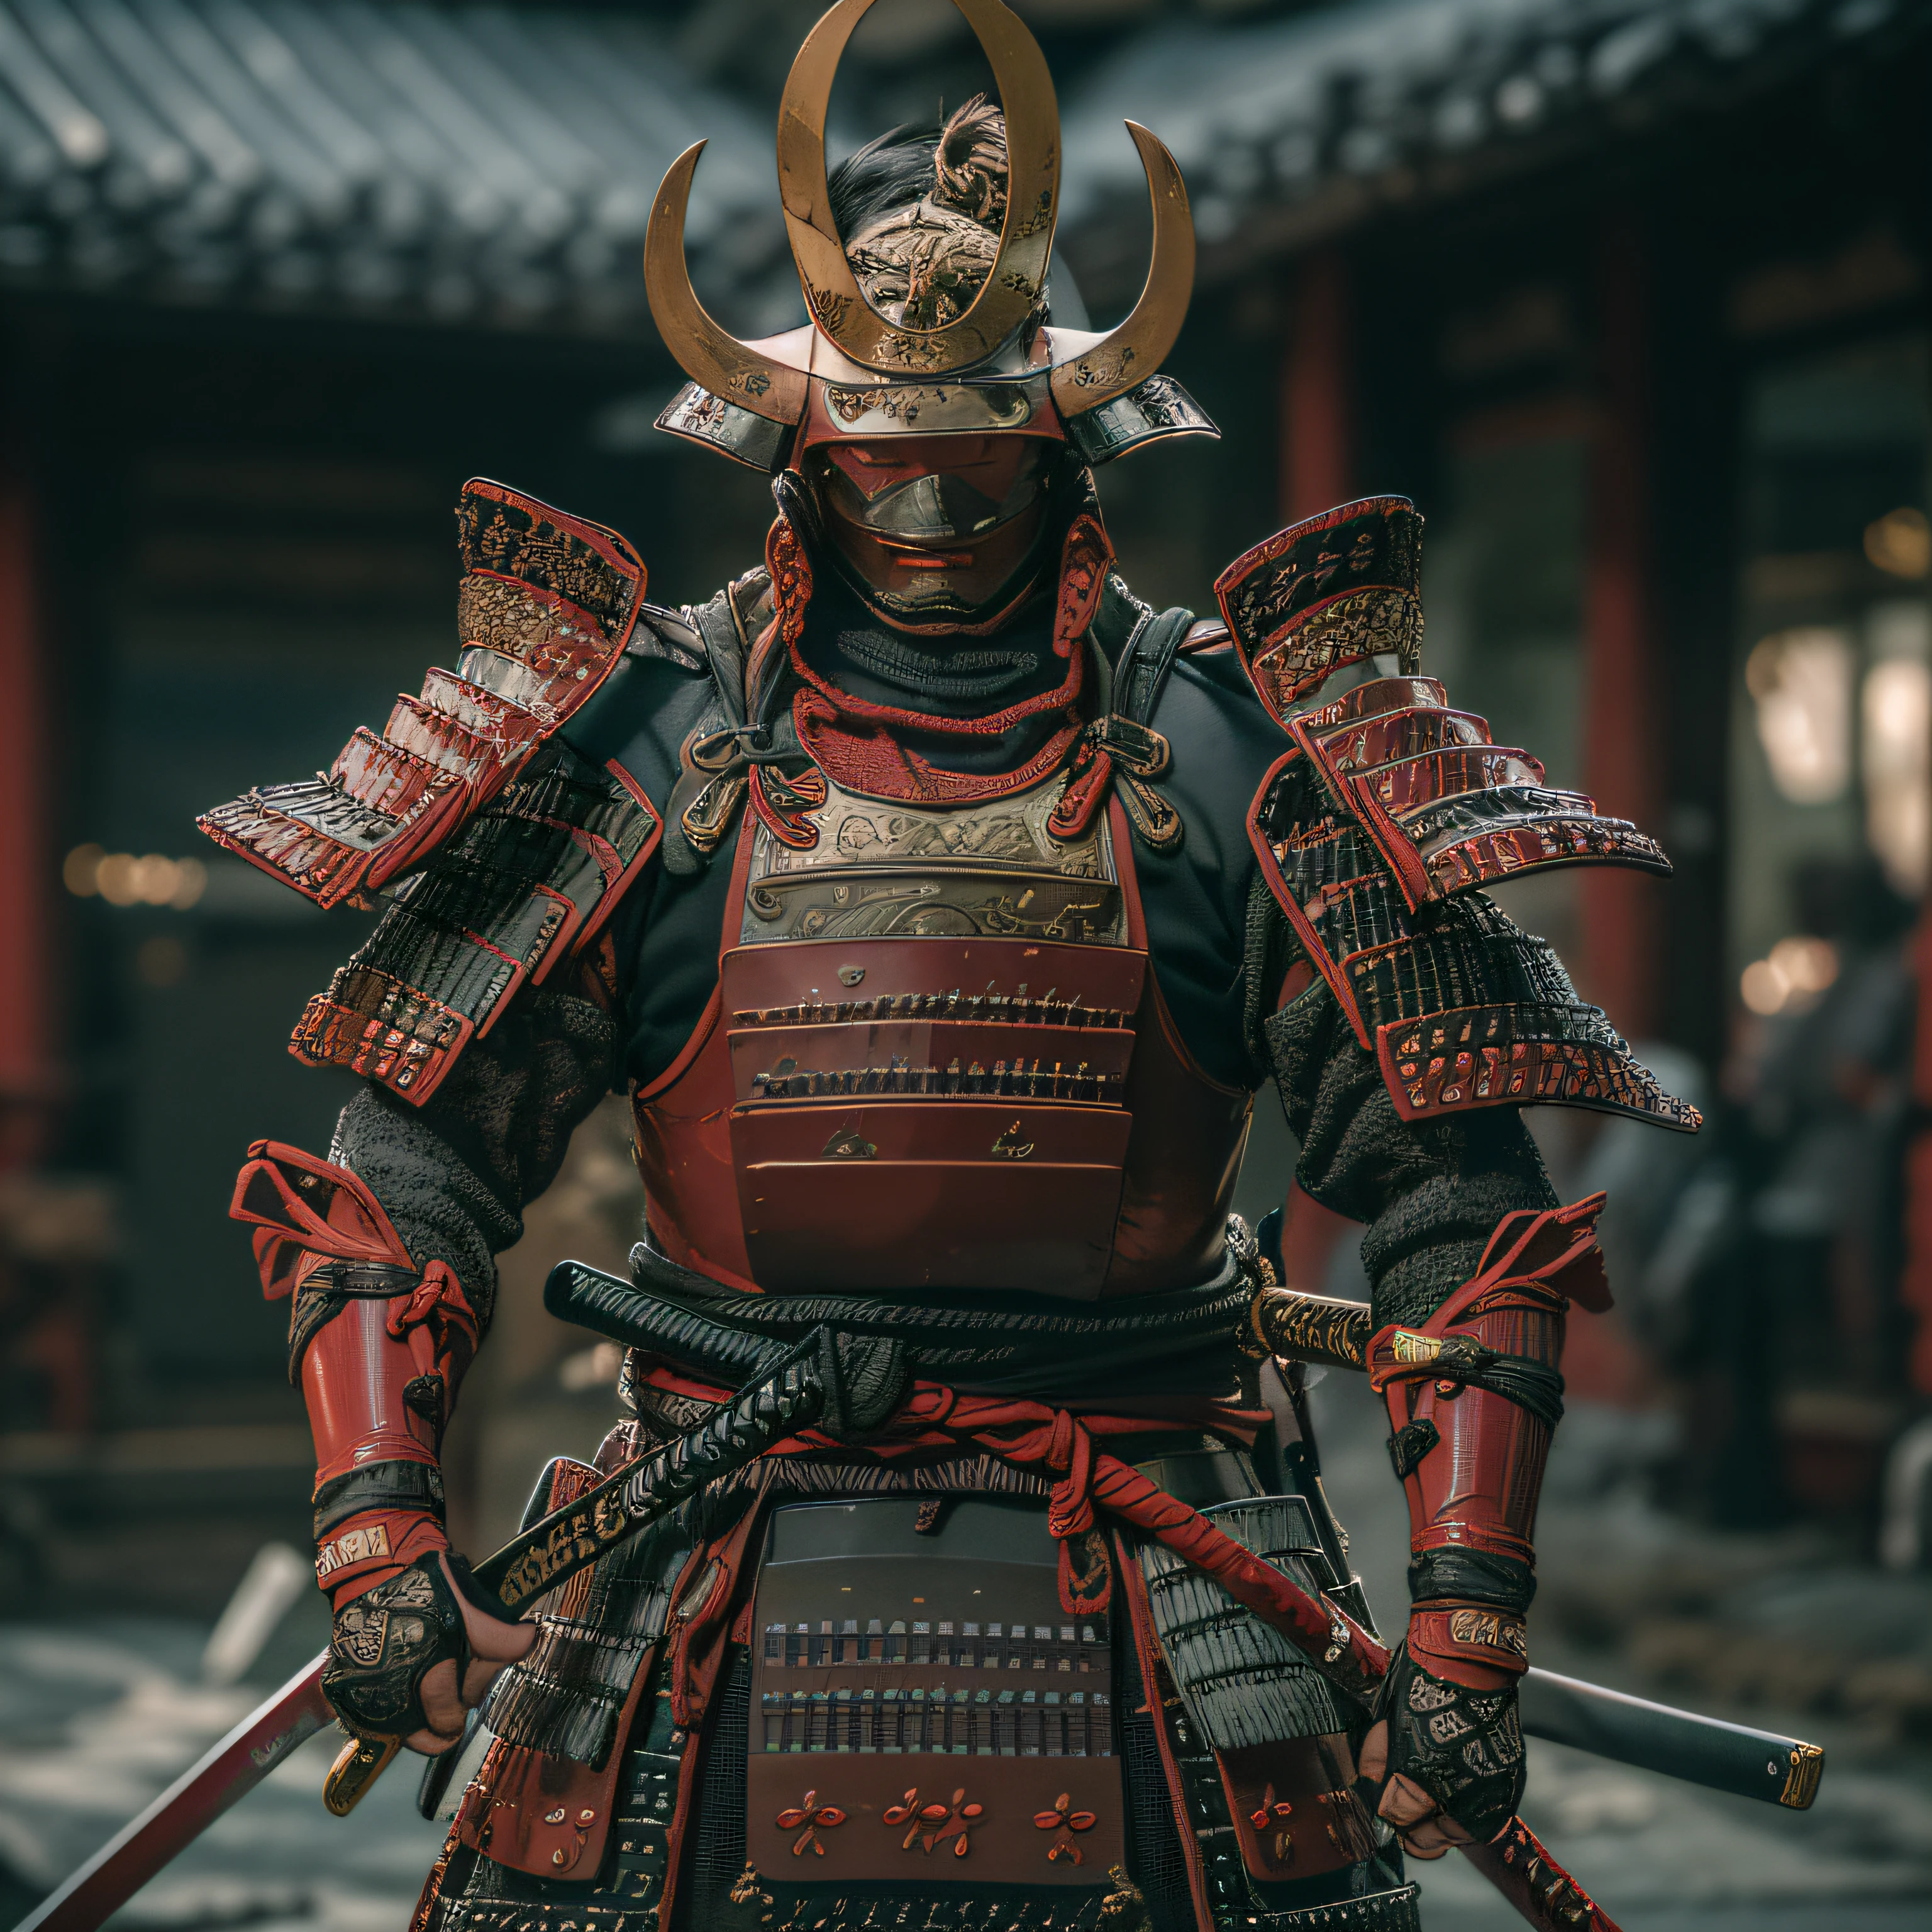 (masterpiece, ultra-high resolution:1.4), (photo of a sengoku daimyo samurai branding a katana with cuirass and helmet:1.3), katana on both hands, face highly detailed, (japanese heritage samurai armor and helm), (tall stature and muscular body:1.4), (Sony Alpha 1 camera, renowned for capturing the highest level of detail in a photo:1.3), (the samurai's face with perfect symmetry and flawless features:1.2), (black and red armor and helmet:1.3), (standing with a commanding presence amidst the battlefield:1.1), emphasize of the daimyo armor, Cinematic, Hyper-detailed, insane details, Beautifully color graded, Unreal Engine, DOF, Super-Resolution, Megapixel, Cinematic Lightning, Anti-Aliasing, FKAA, TXAA, RTX, SSAO, Post Processing, Post Production, Tone Mapping, CGI, VFX, SFX, Insanely detailed and intricate, Hyper maximalist, Hyper realistic, Volumetric, Photorealistic, ultra photoreal, ultra-detailed, intricate details, 8K, Super detailed, Full color, Volumetric lightning, HDR, Realistic, Unreal Engine, 16K, Sharp focus, Octane render